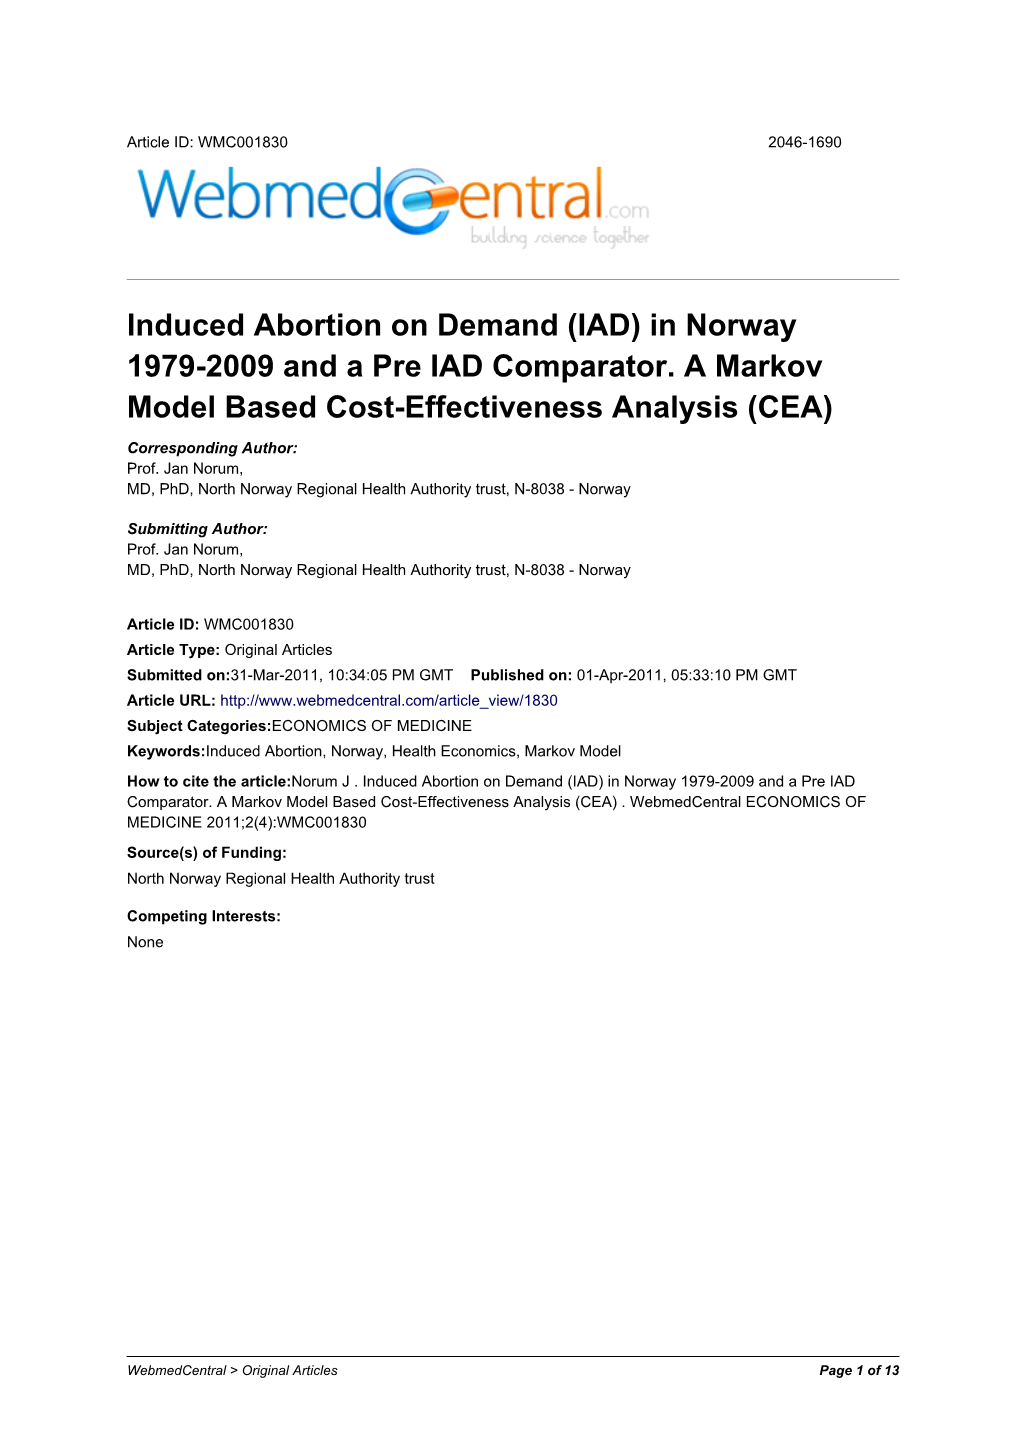 Induced Abortion on Demand (IAD) in Norway 1979-2009 and a Pre IAD Comparator